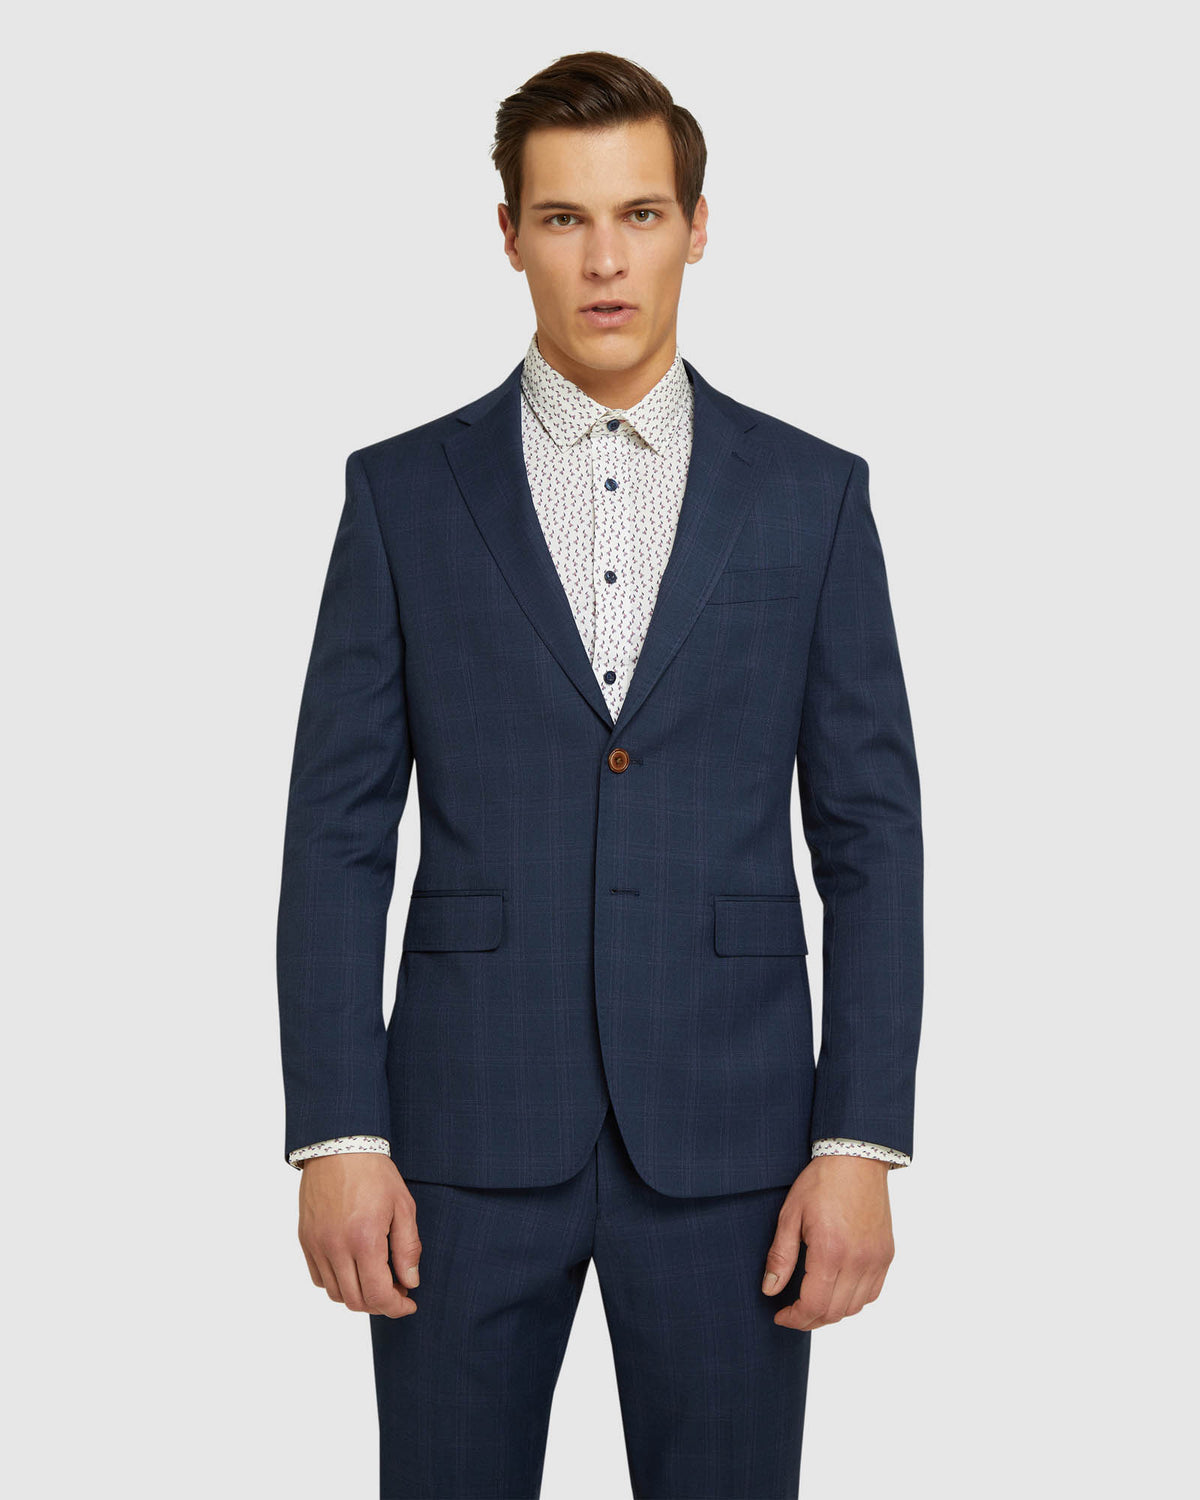 BYRON ECO CHECKED SUIT JACKET NAVY CHECK